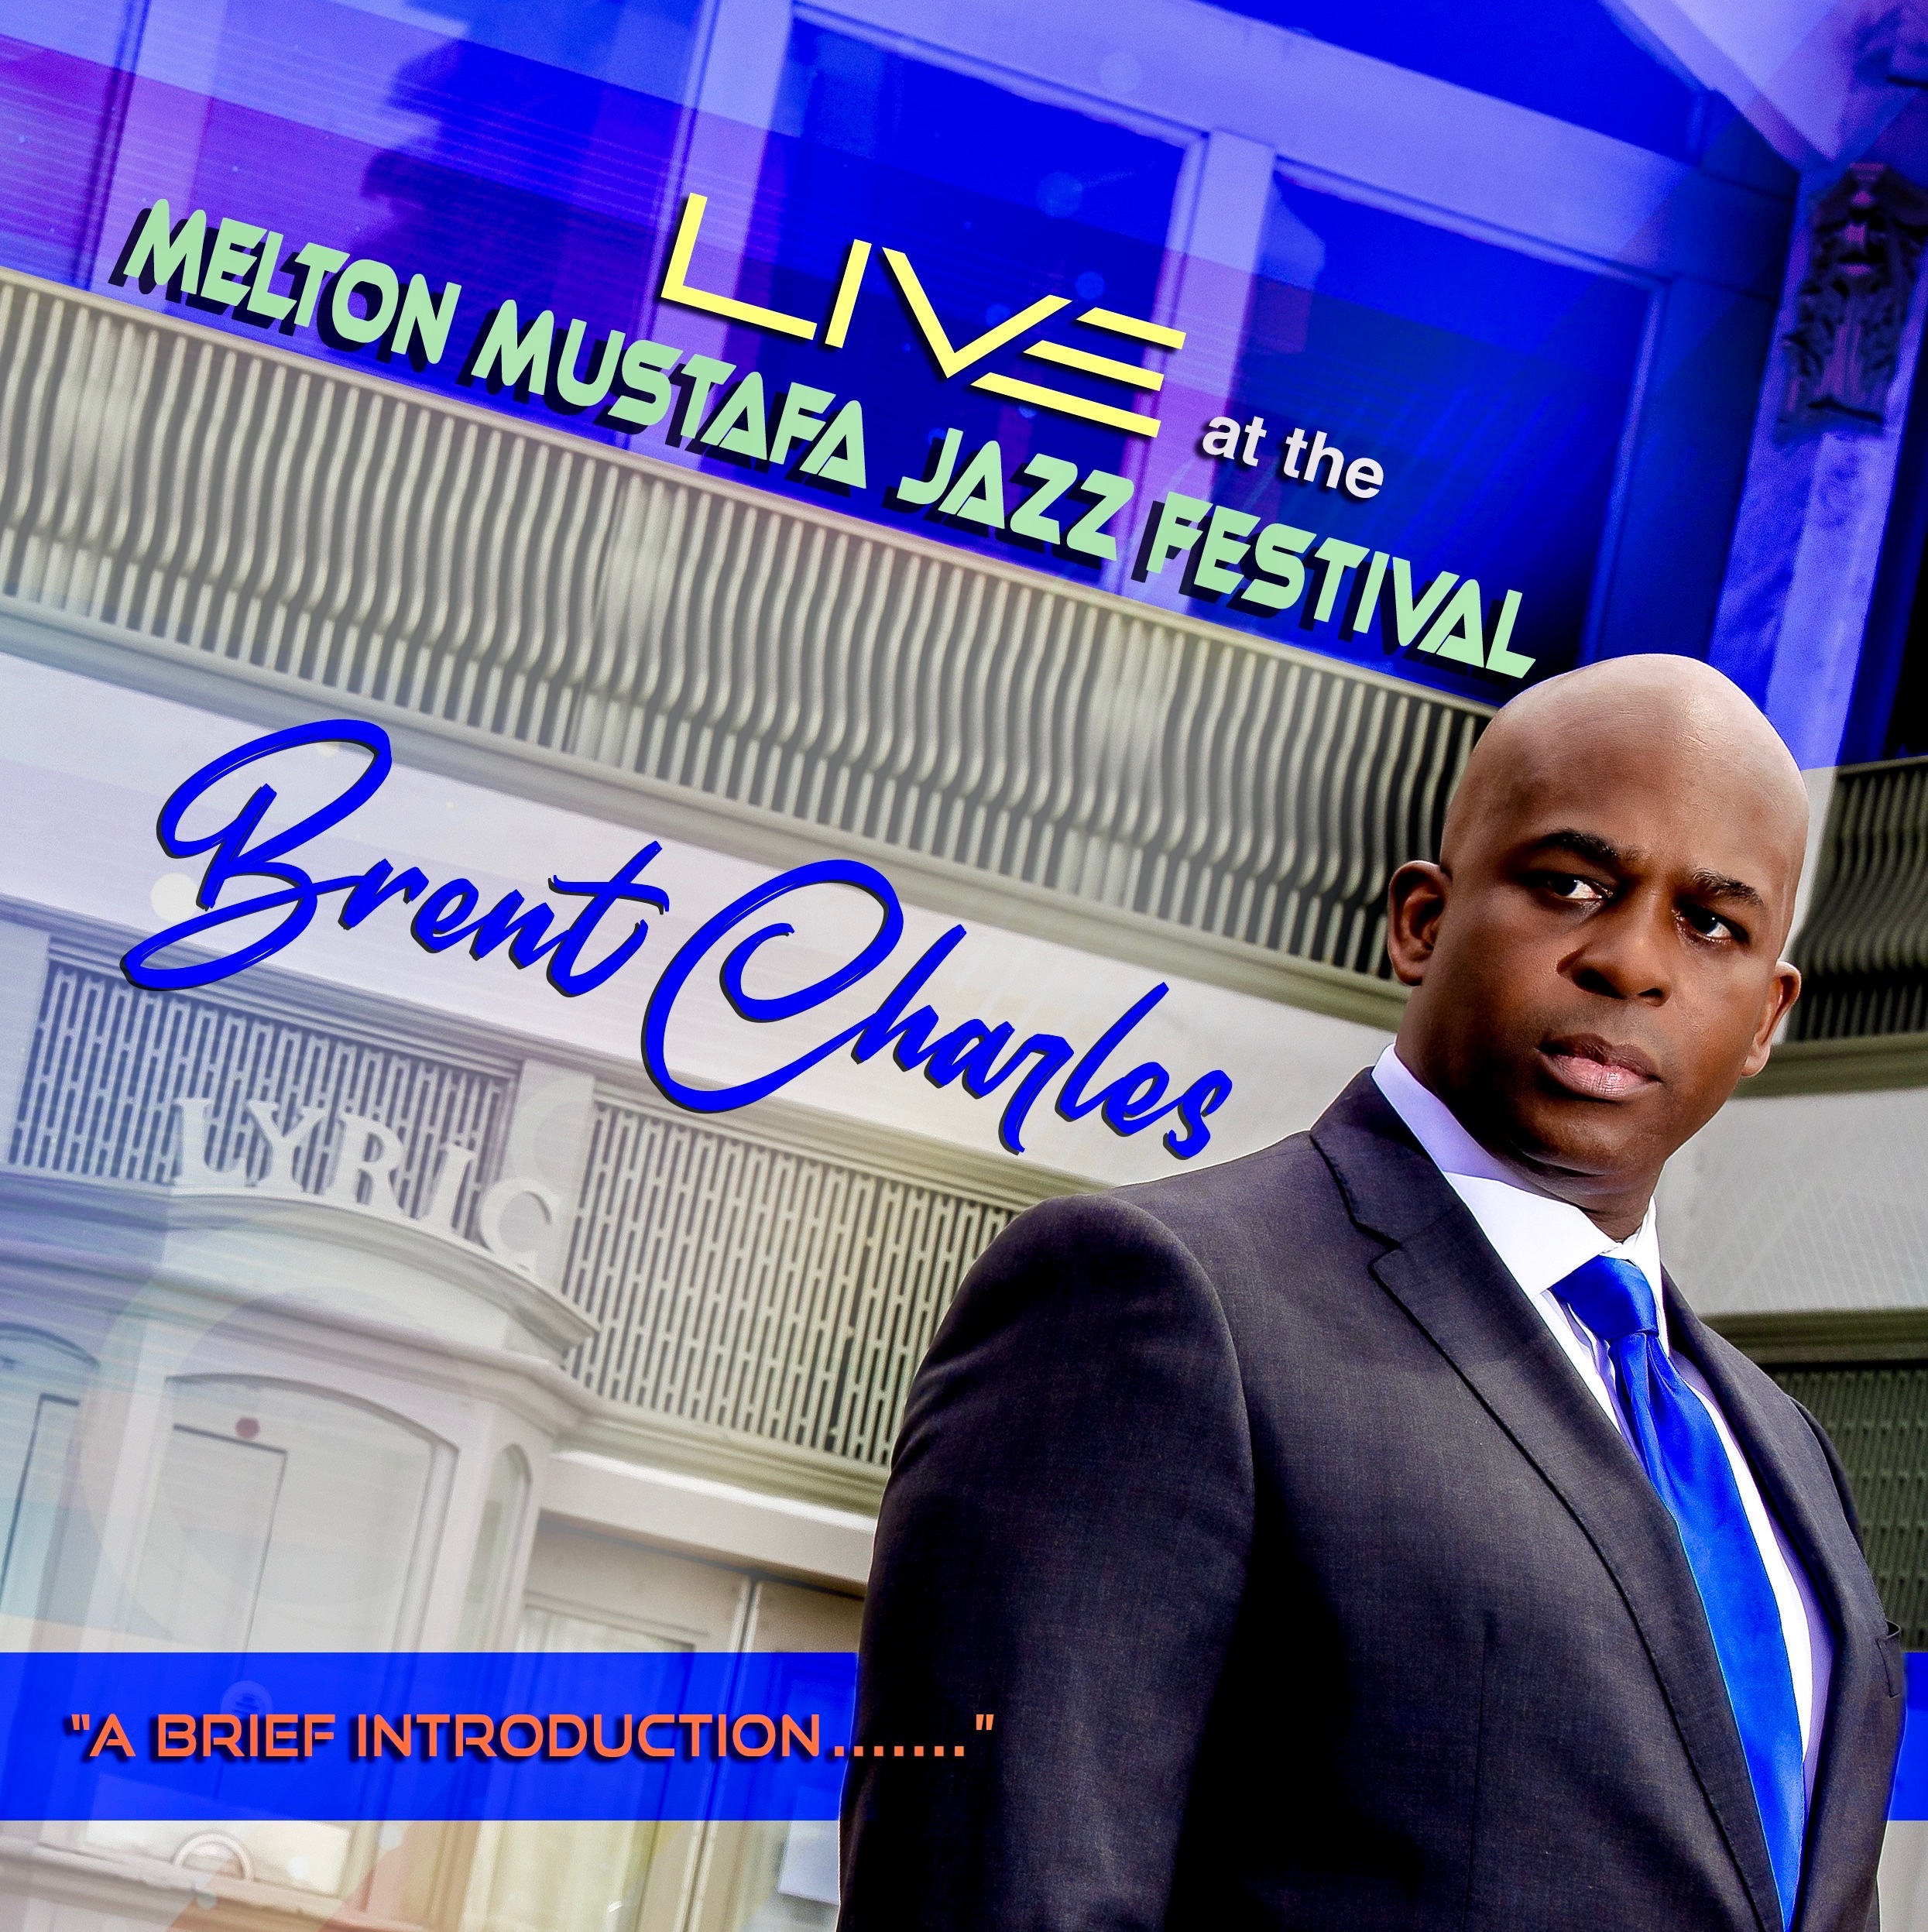 "Brent Charles: LIVE at the Melton Mustafa Jazz Festival - A Brief Introduction" Out Now for Jazz Fans Everywhere